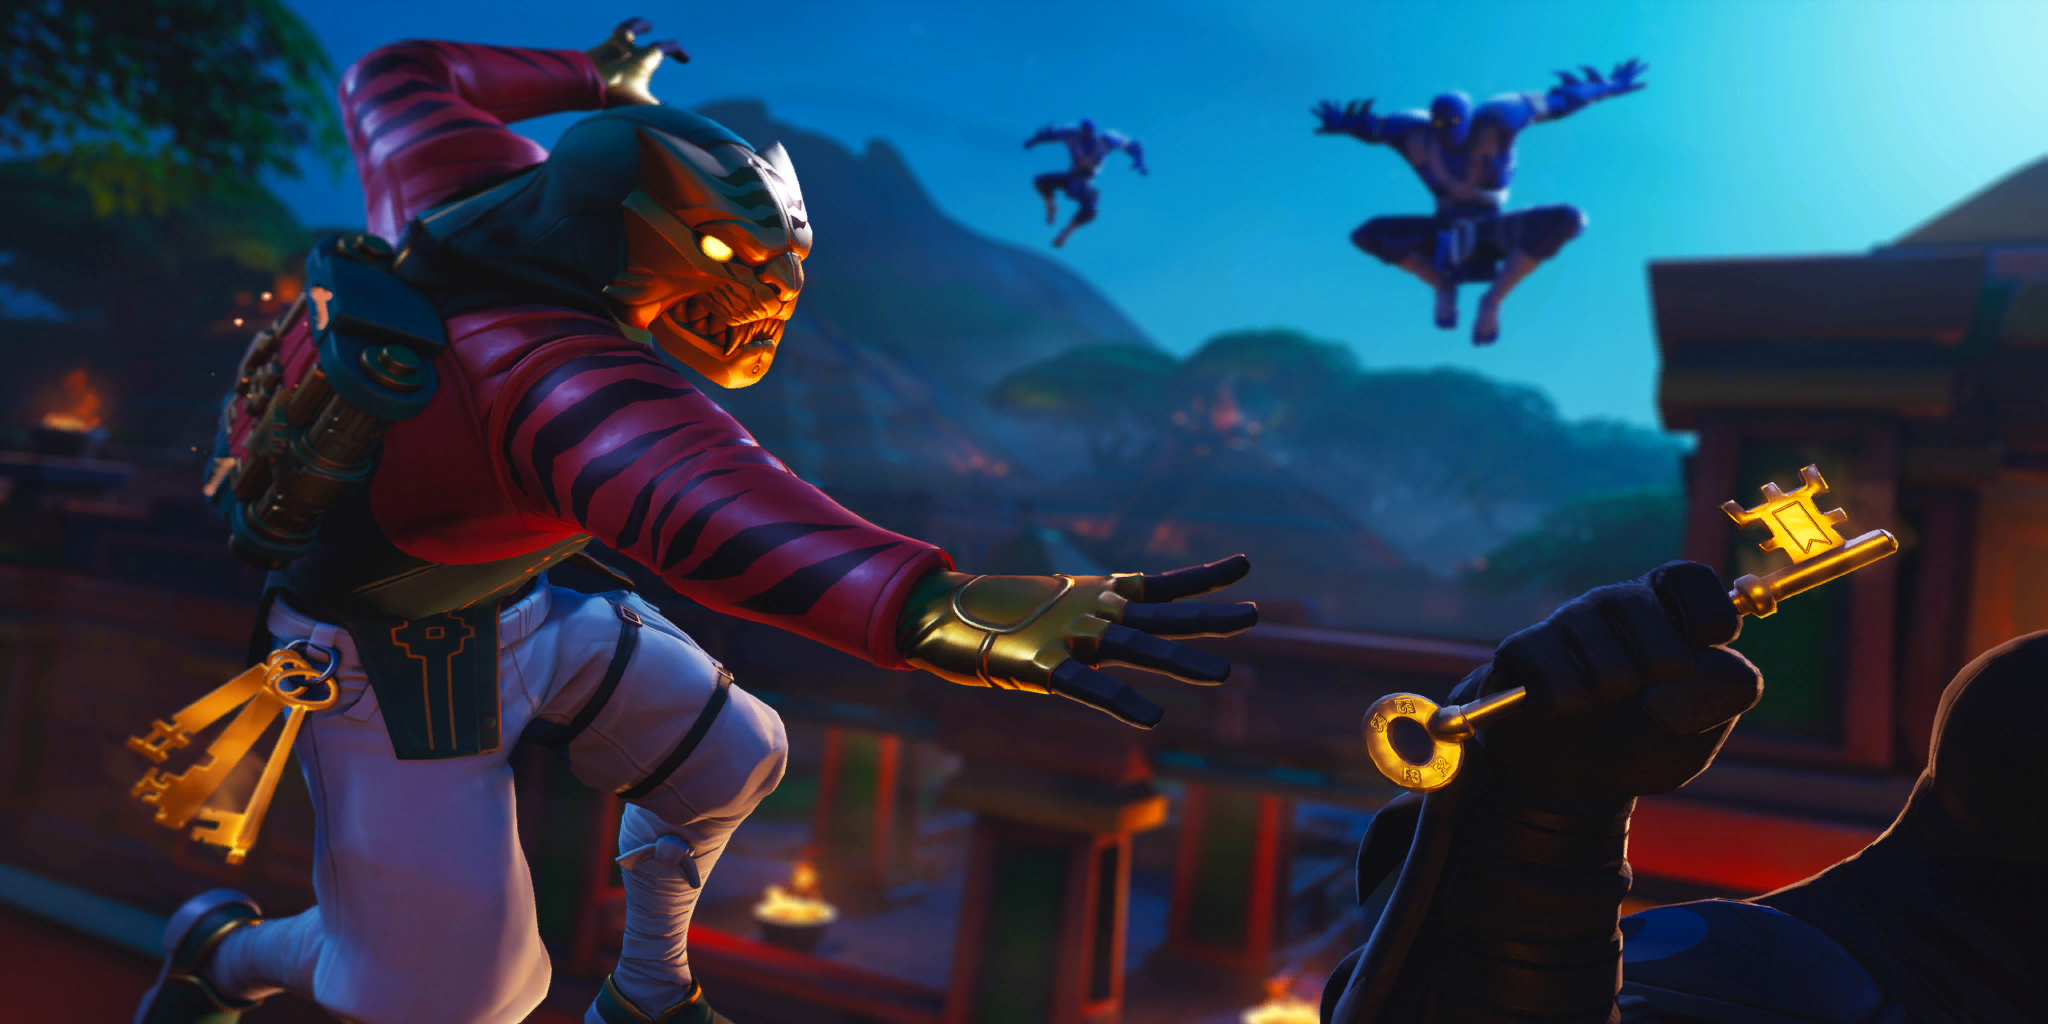 Fortnite Season 8 - Week 6 Challenges available now